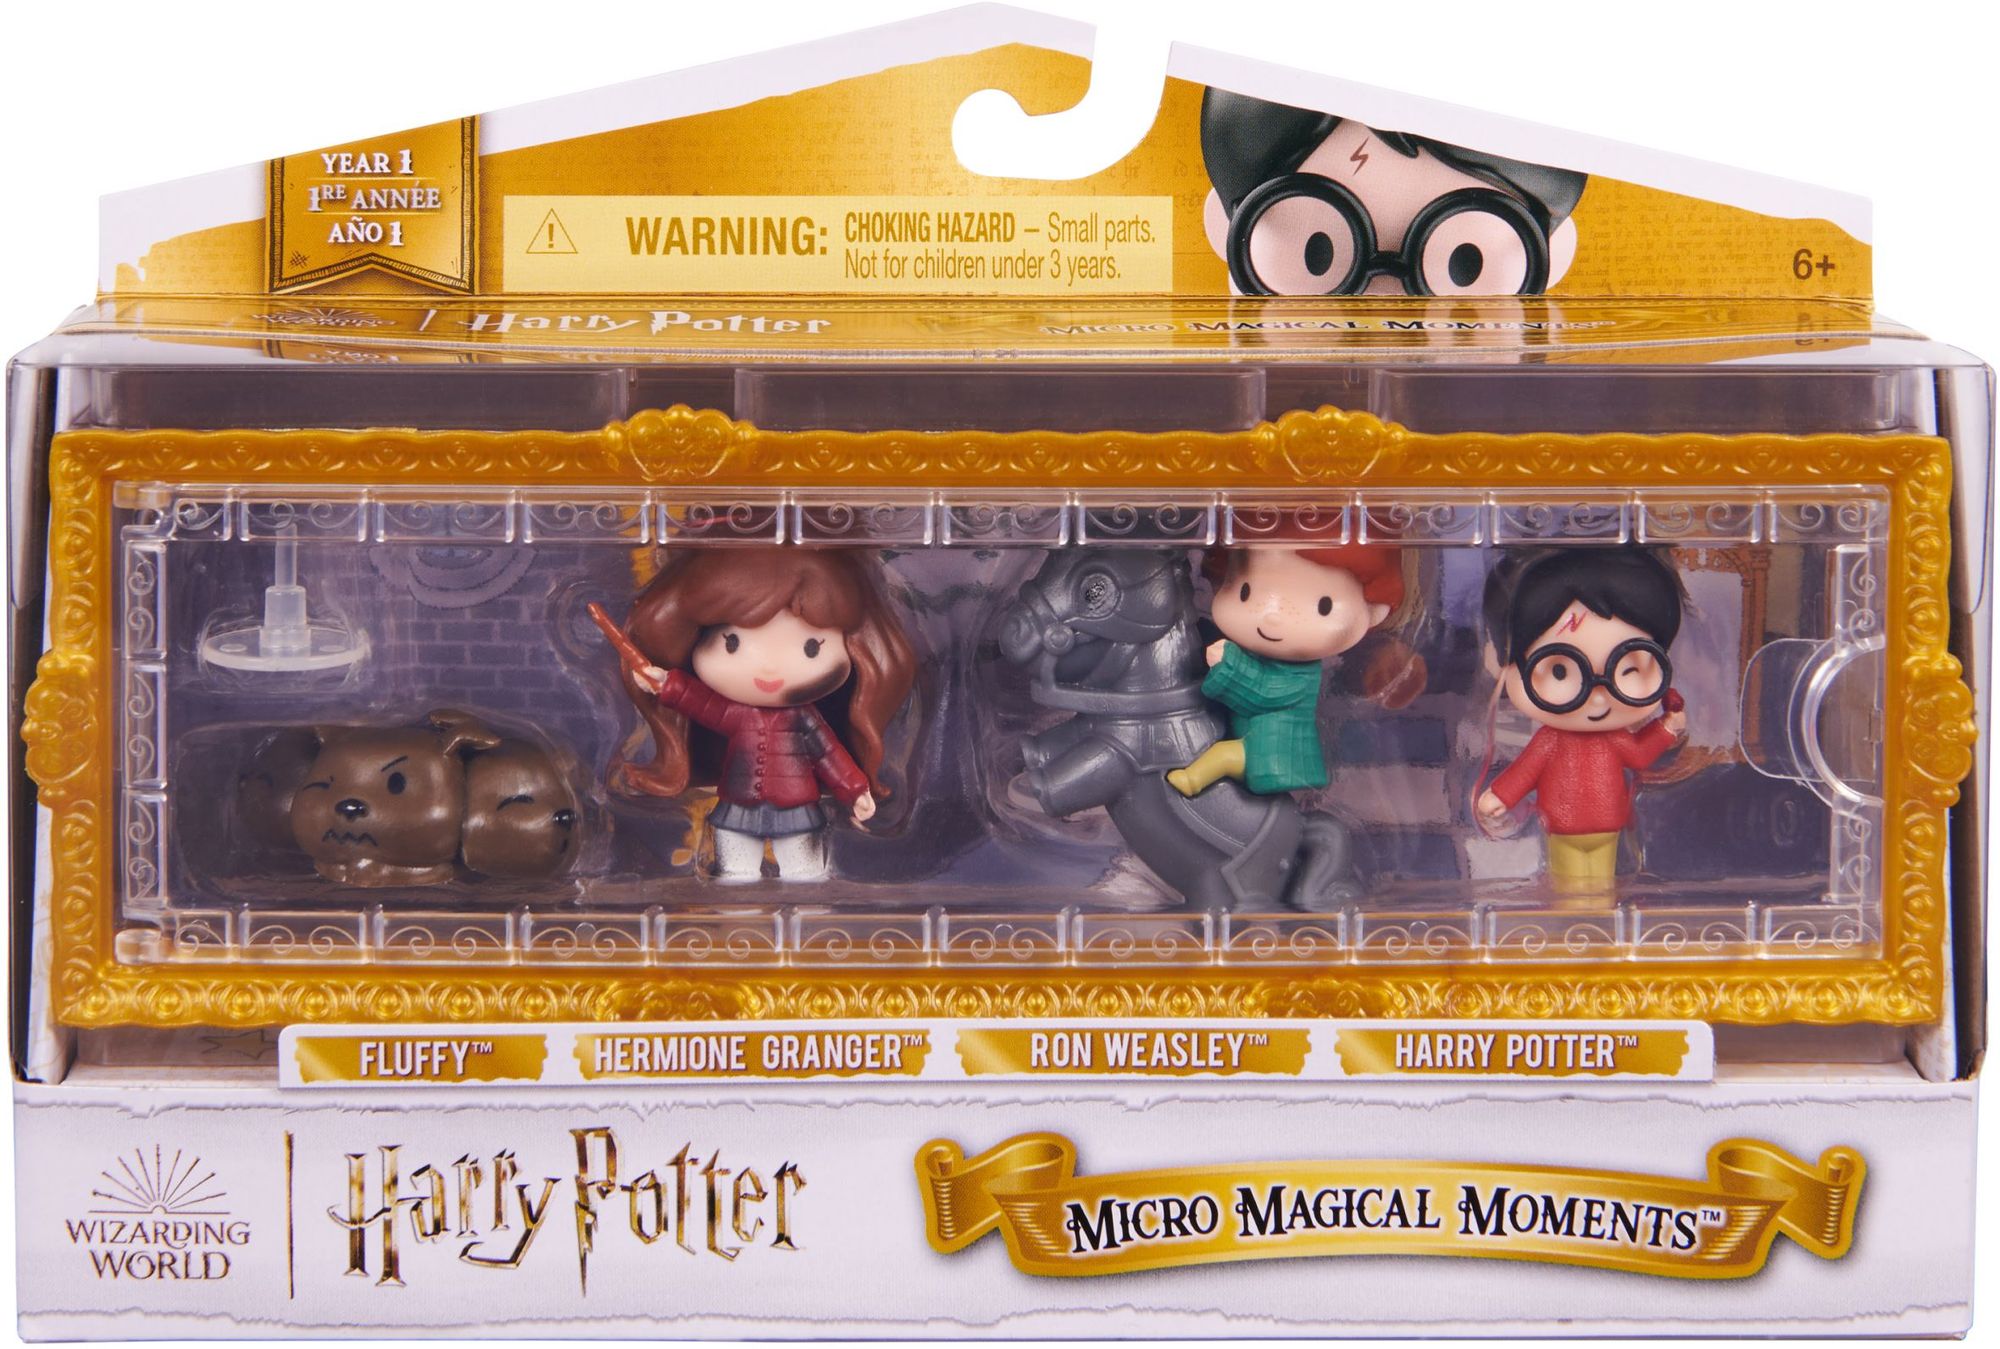 Spin Master - Wizarding World - Harry Potter - Micro Magical Moments' kaufen  - Spielwaren